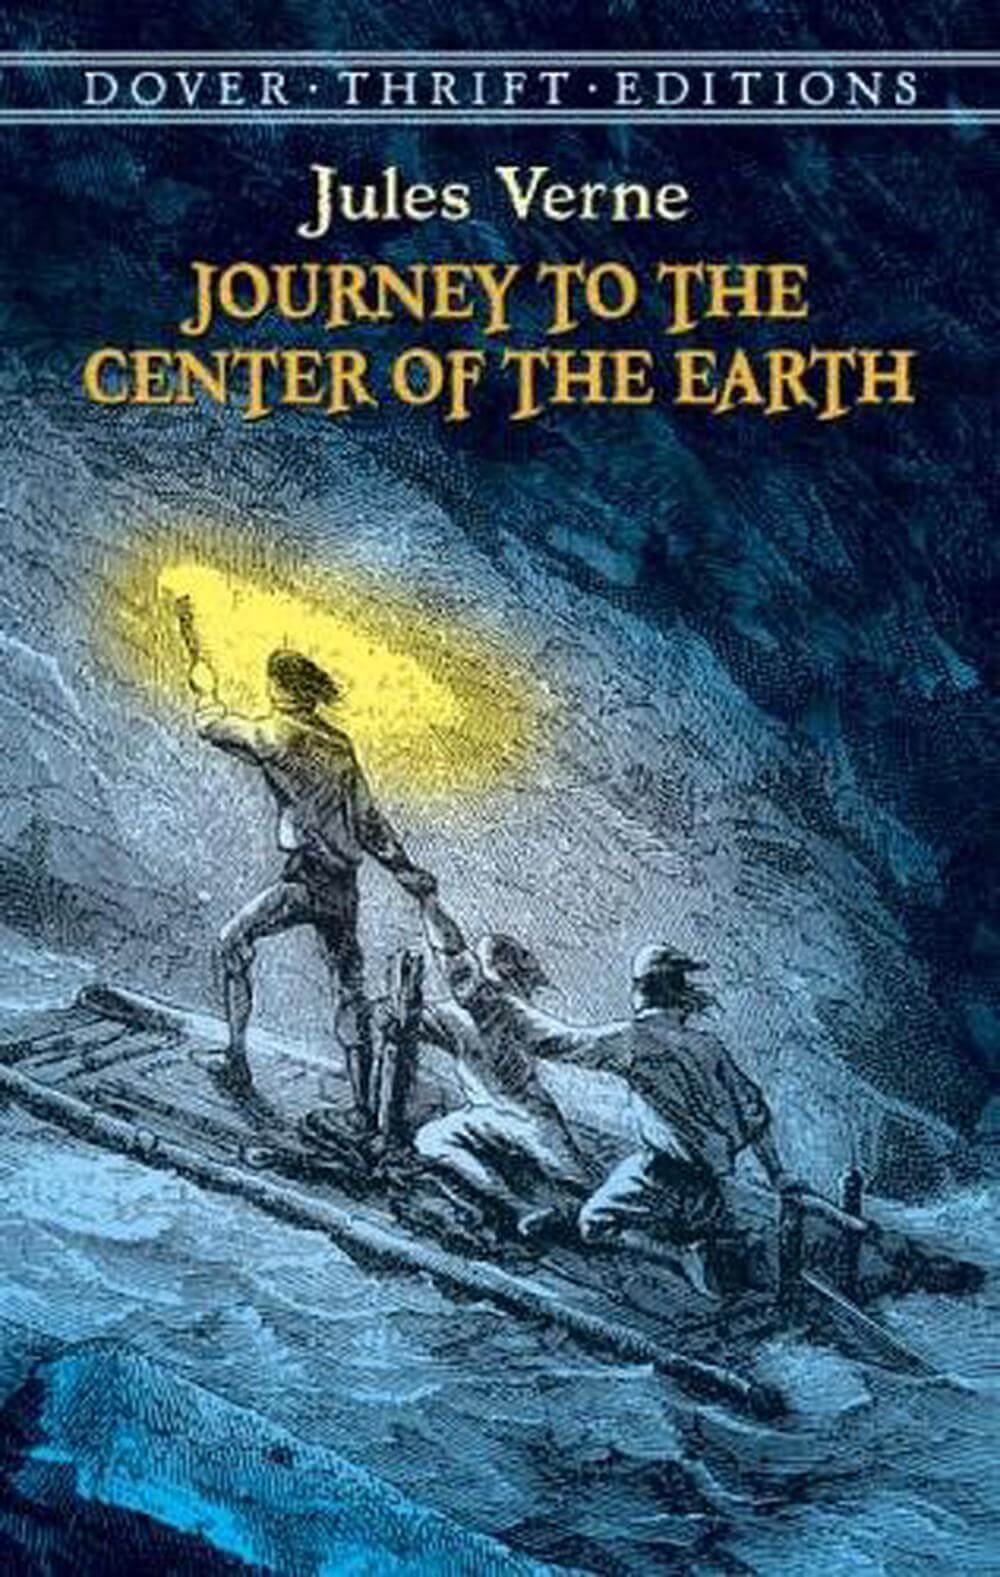 Journey to The Centre of The Earth